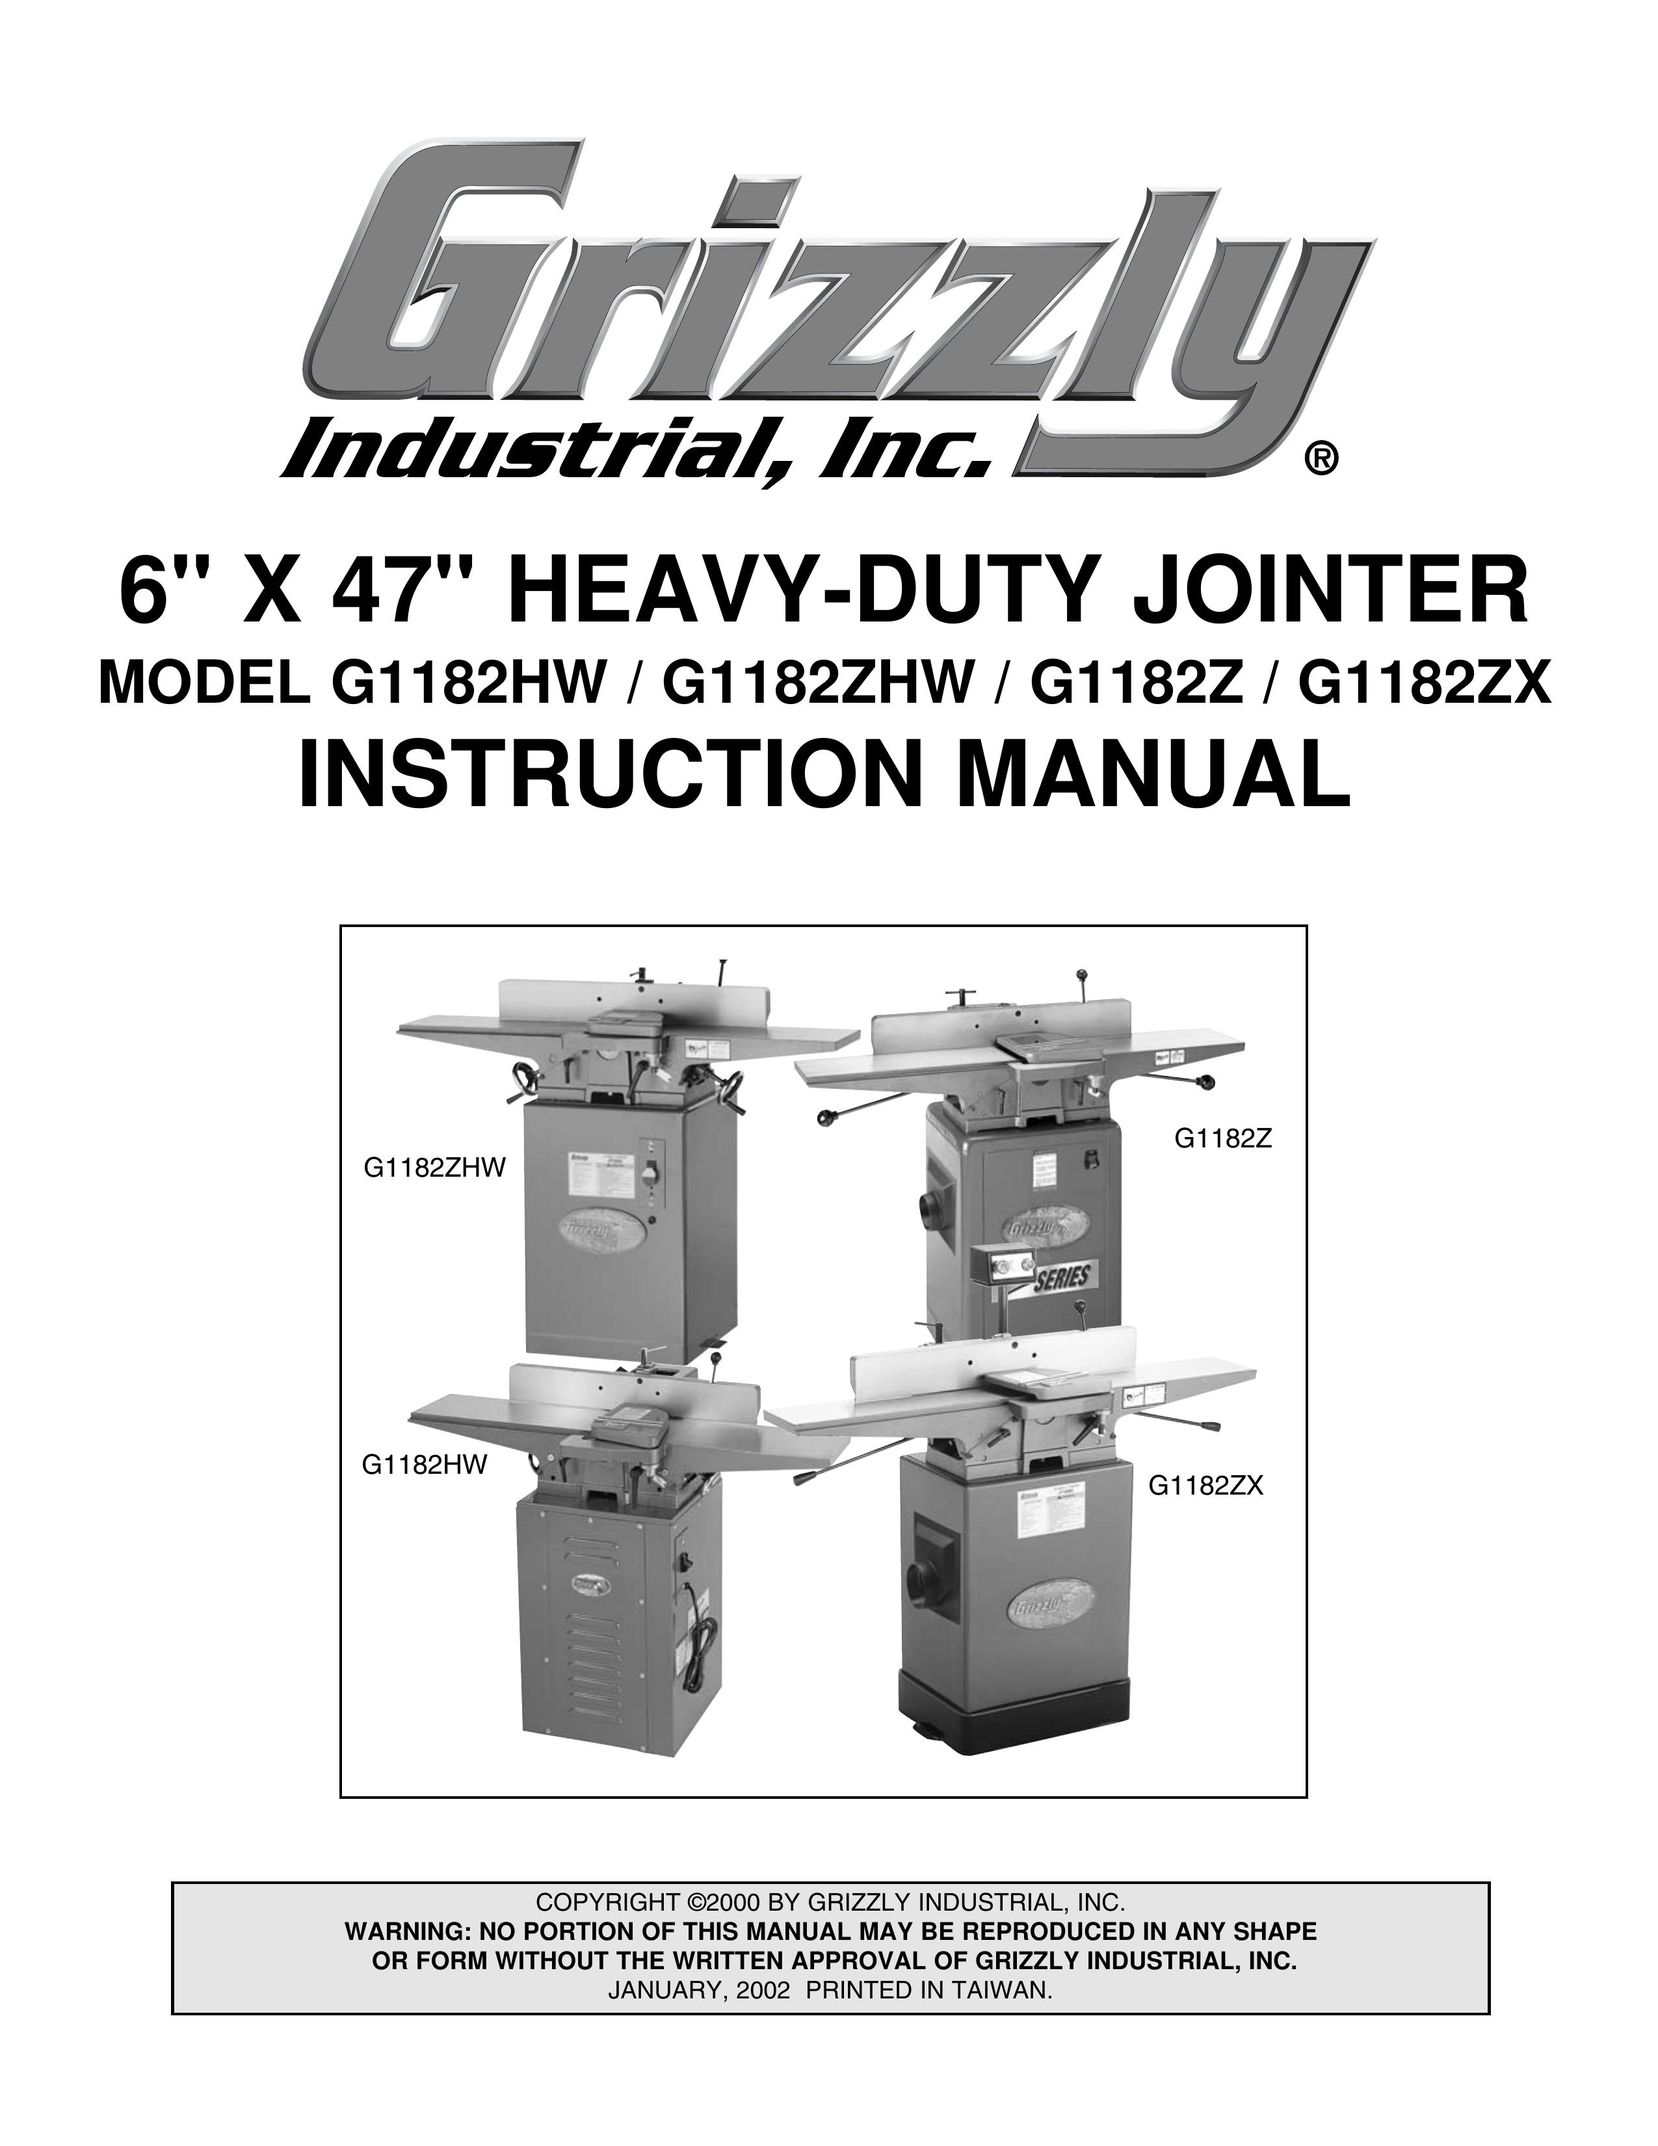 Grizzly G1182Z Biscuit Joiner User Manual (Page 1)